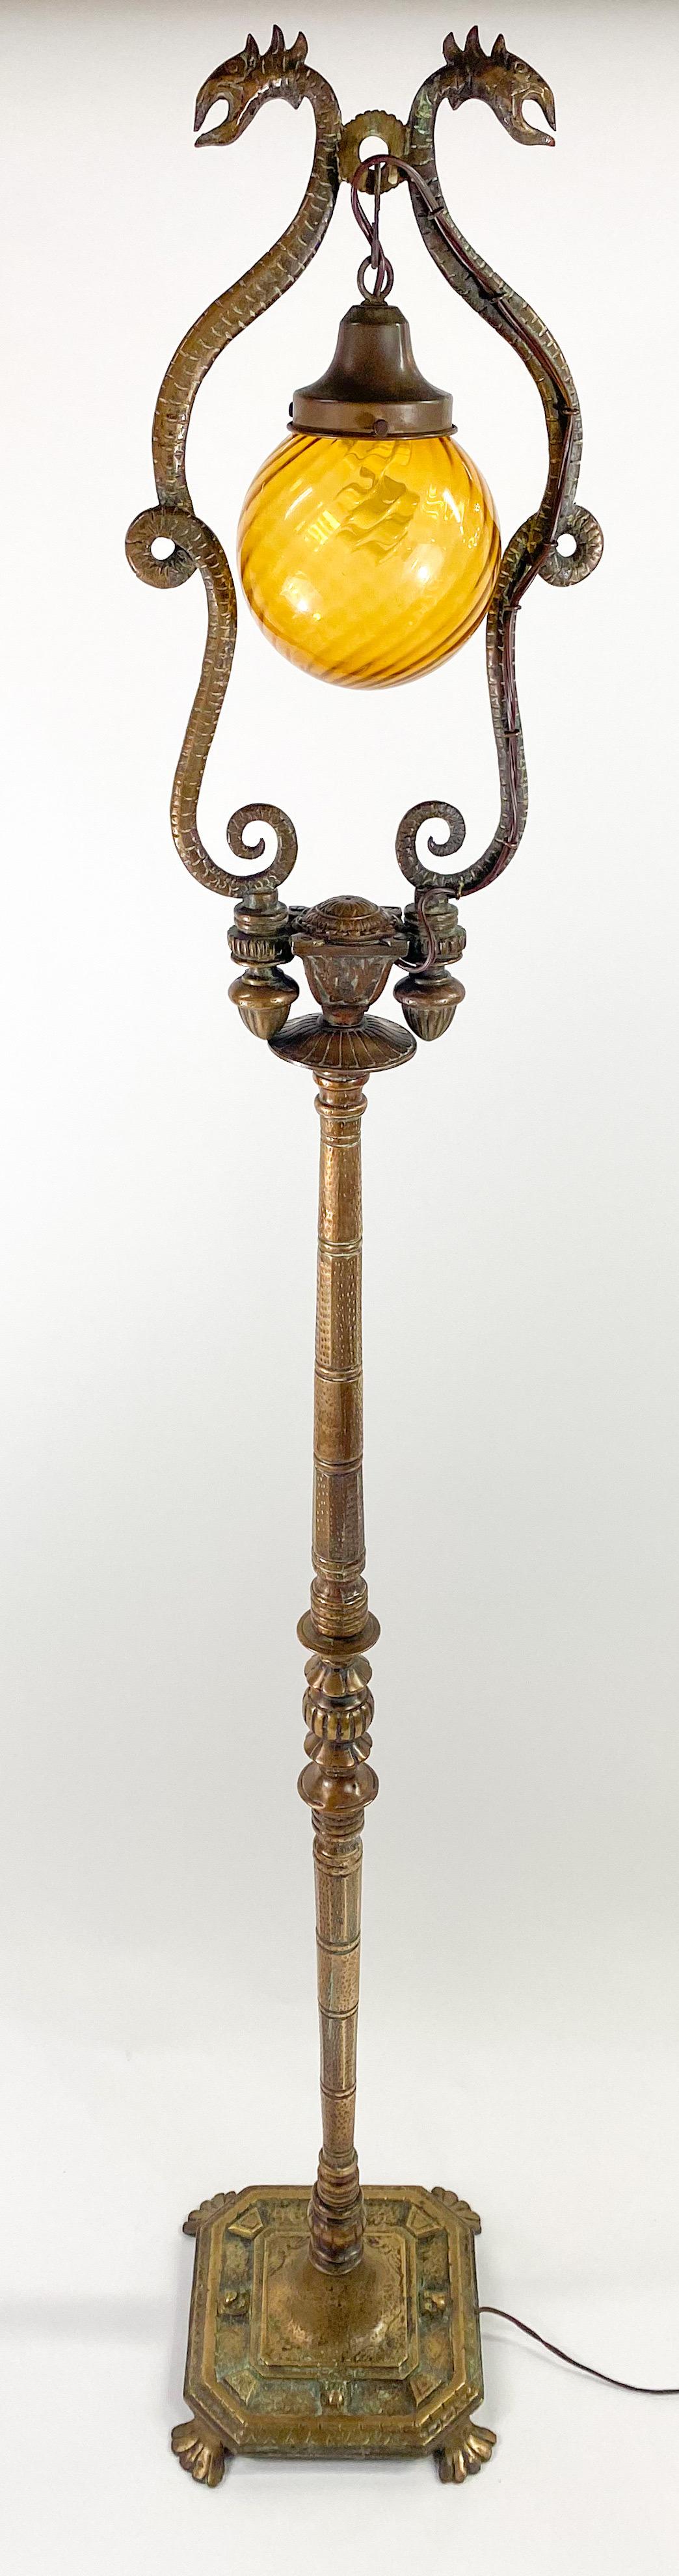 An exceptional late 19th century rare French Rococo revival style floor lamp featuring amazing details. The floor lamp is made of bronze and shows great patina adding Beauty and charm to its look. Standing on a square base having four claw feet, the